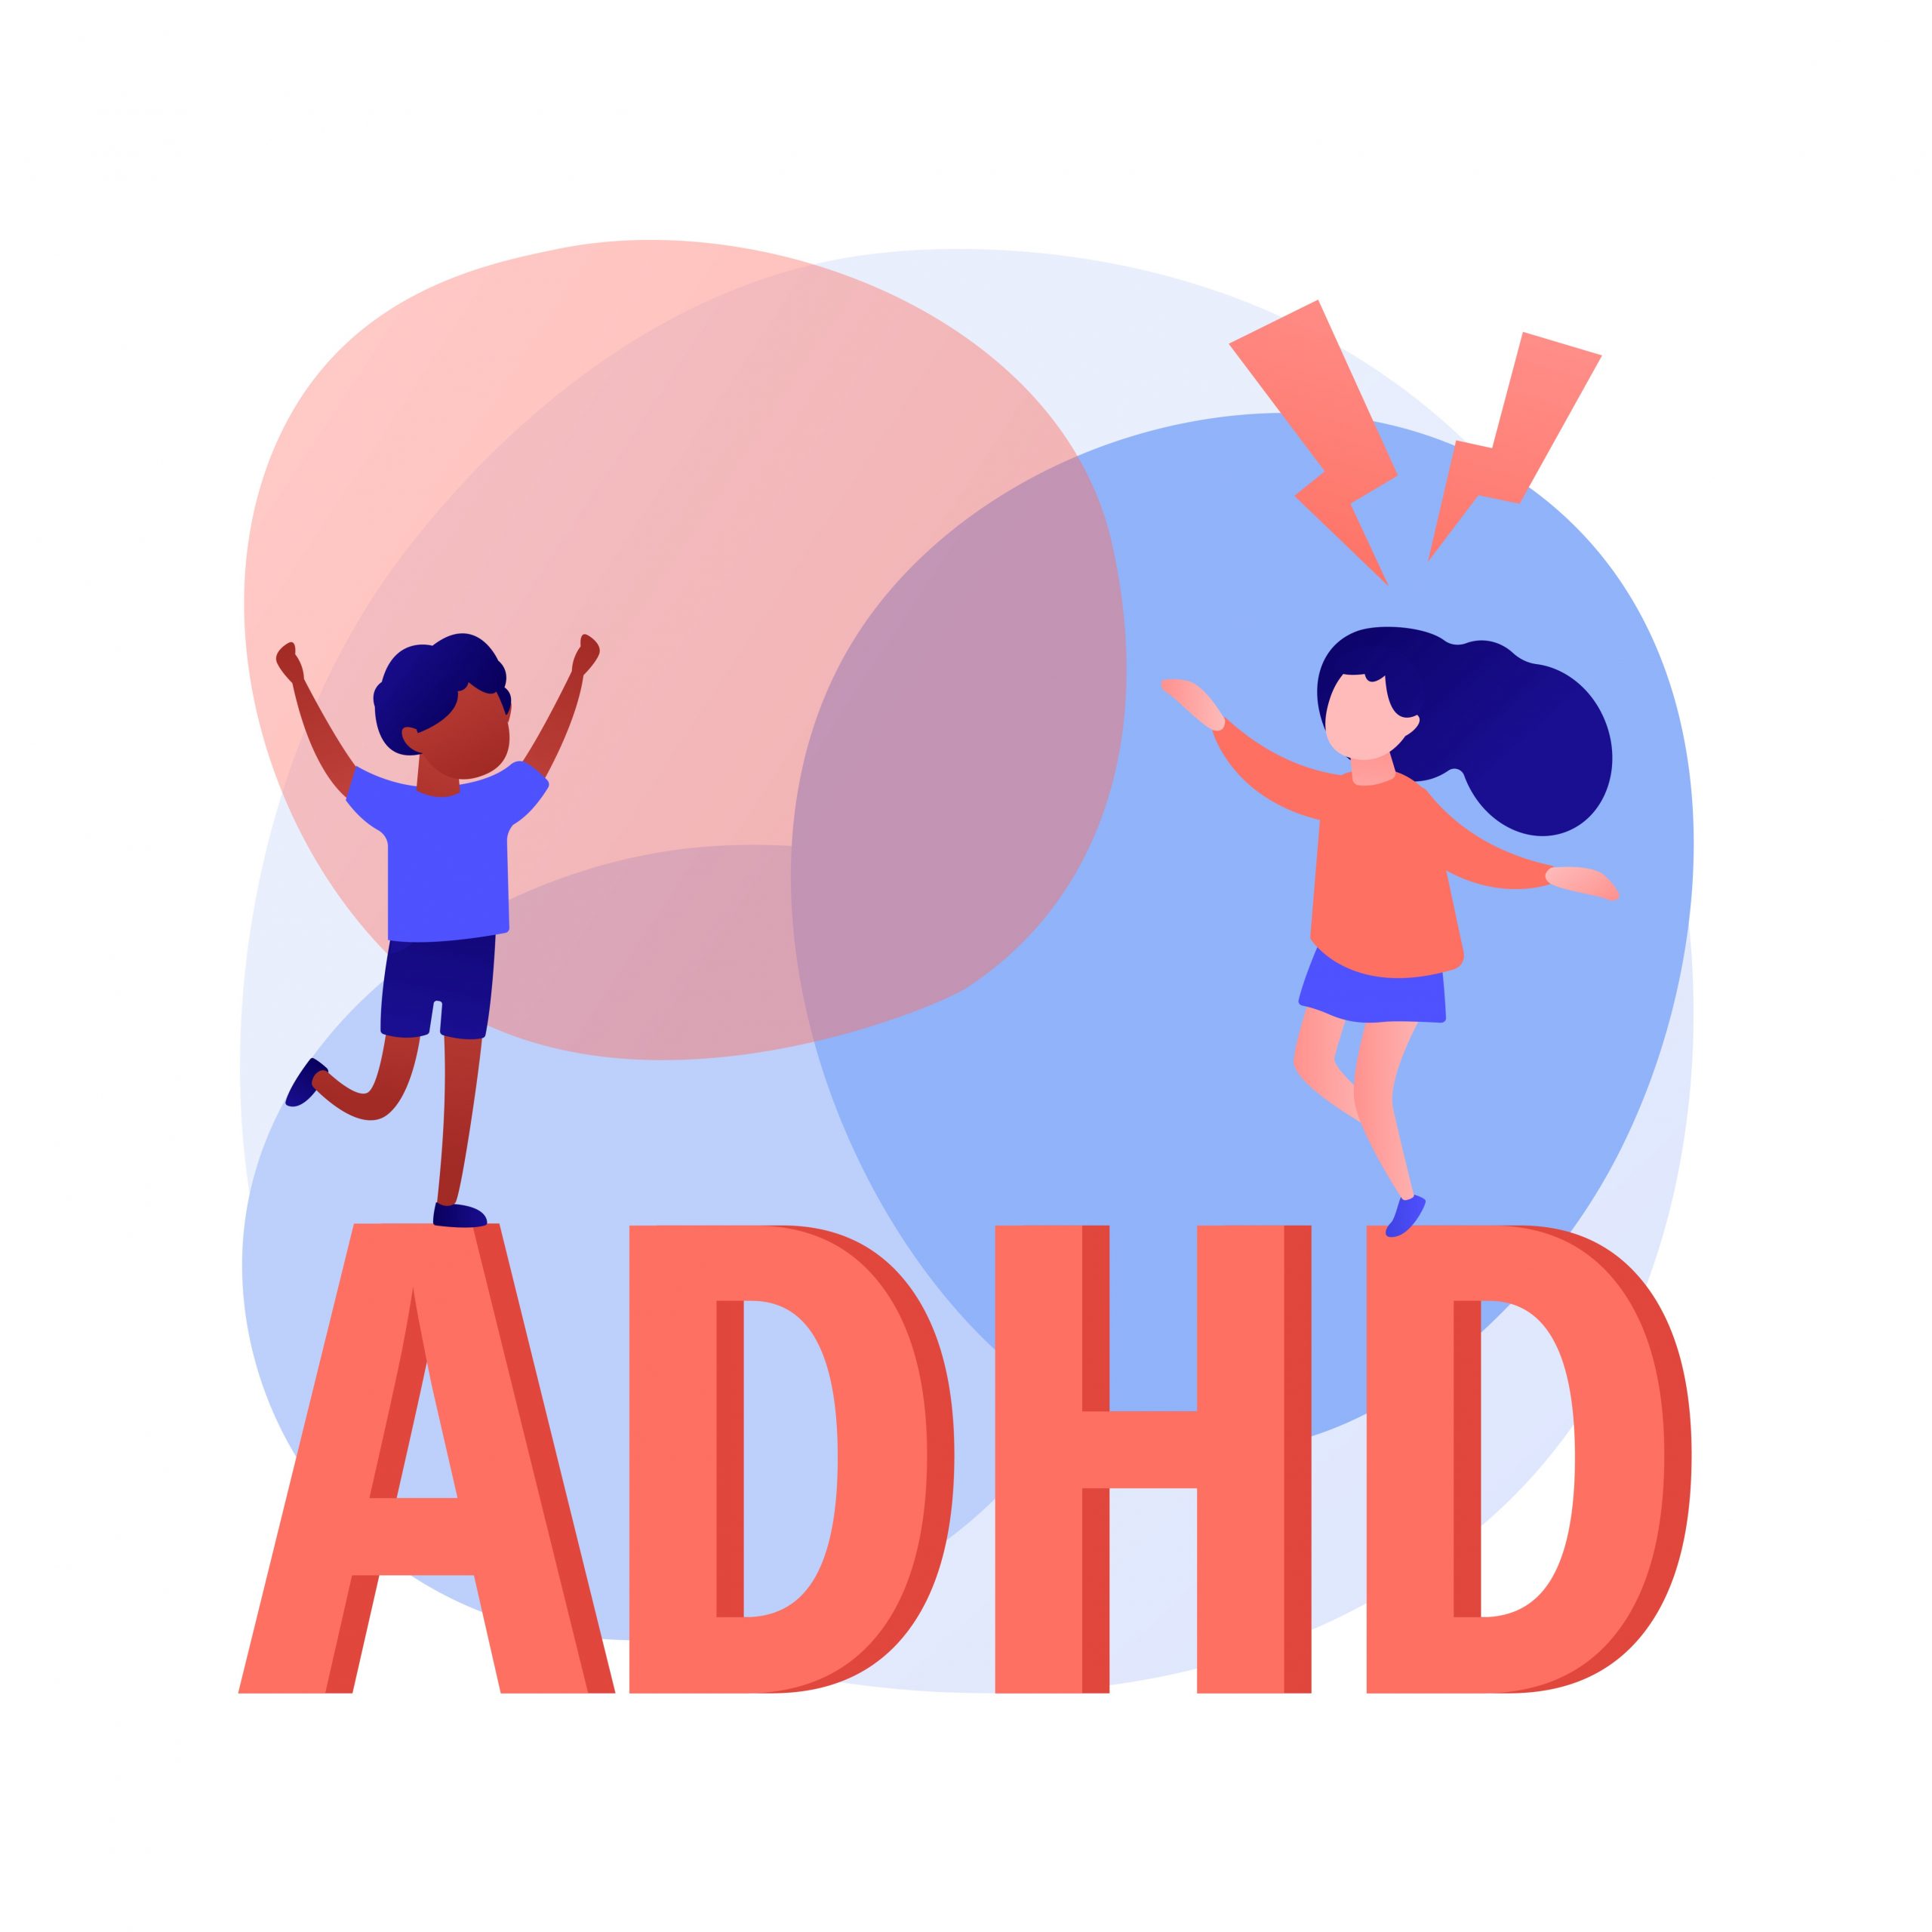 Attention Deficit Hyperactivity Disorder (ADHD) in India